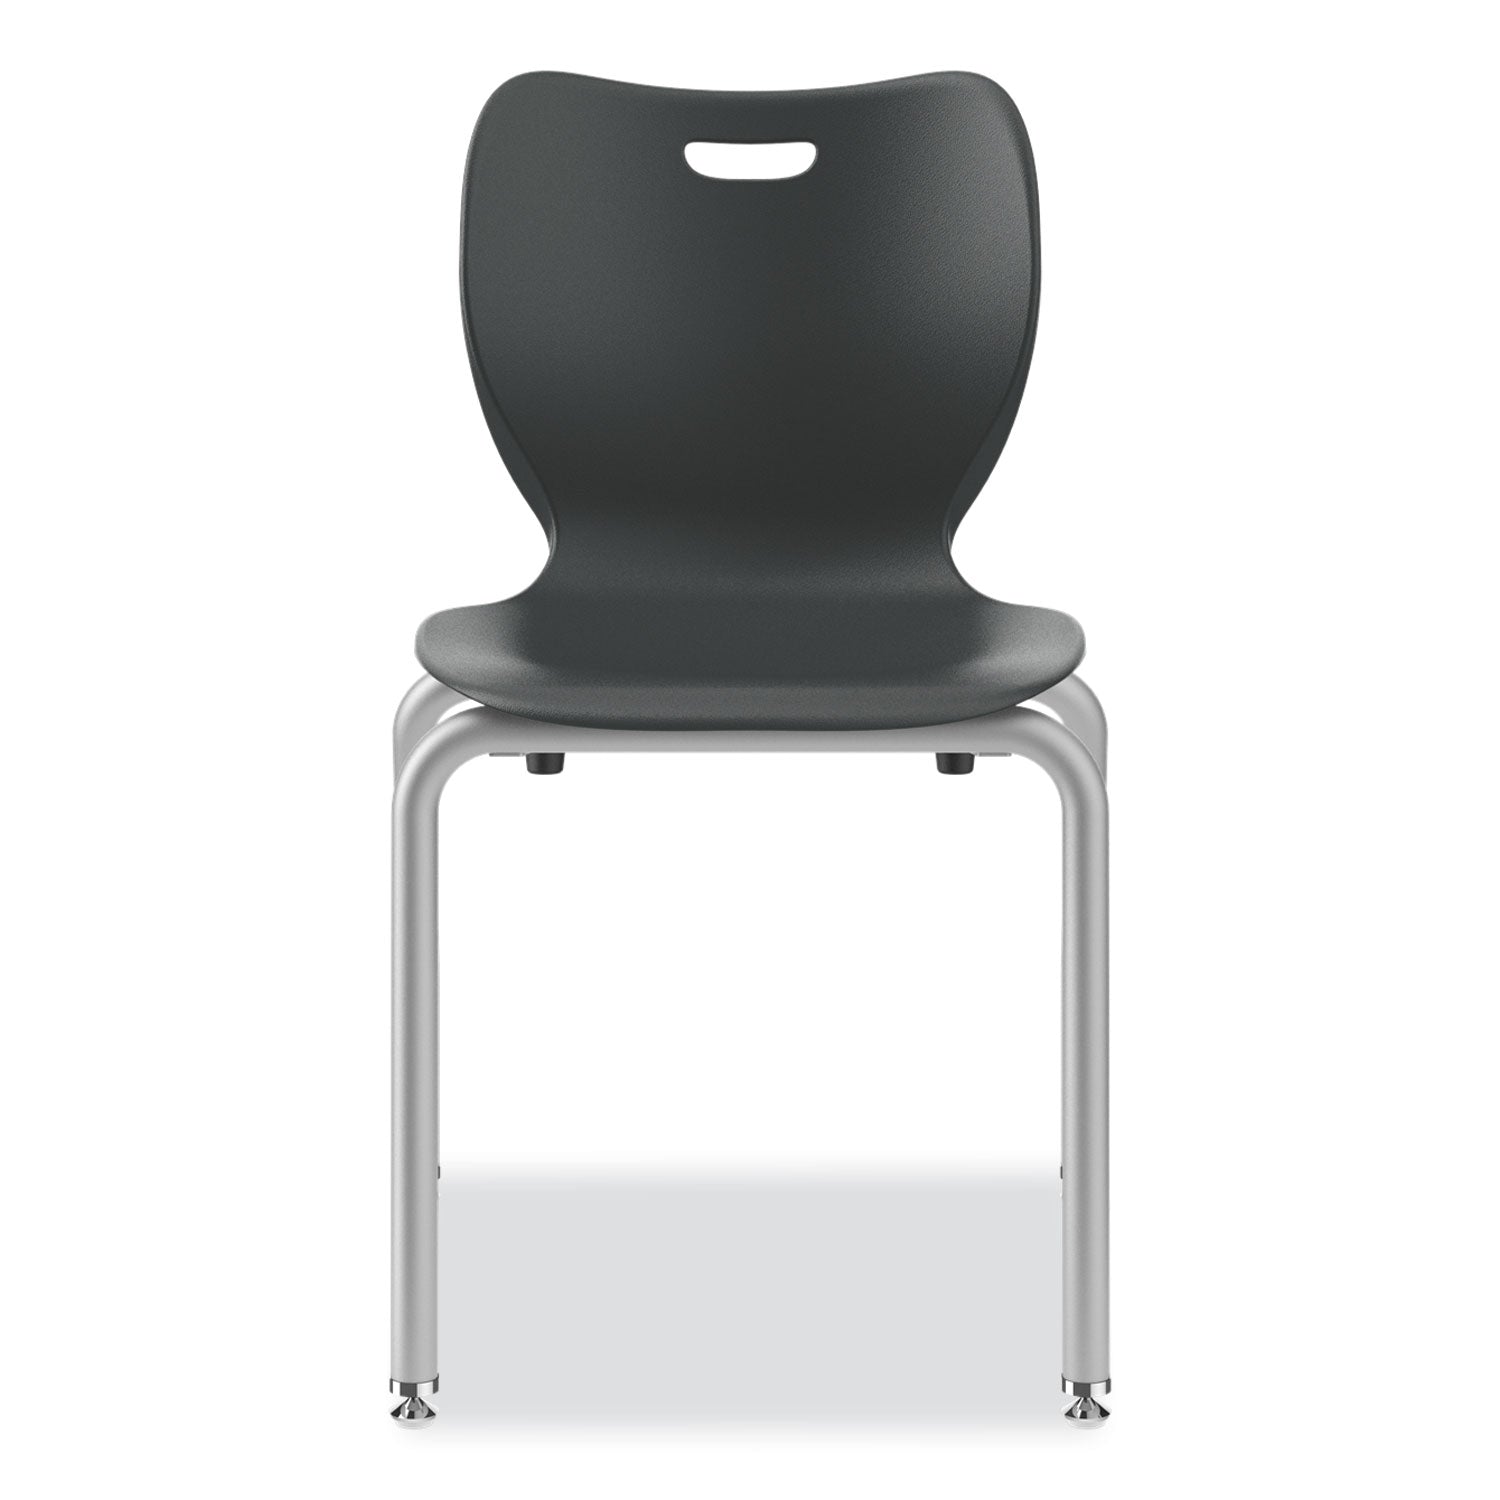 smartlink-four-leg-chair-supports-up-to-275-lb-18-seat-height-lava-seat-back-platinum-base-ships-in-7-10-business-days_honsl4l18elap - 4